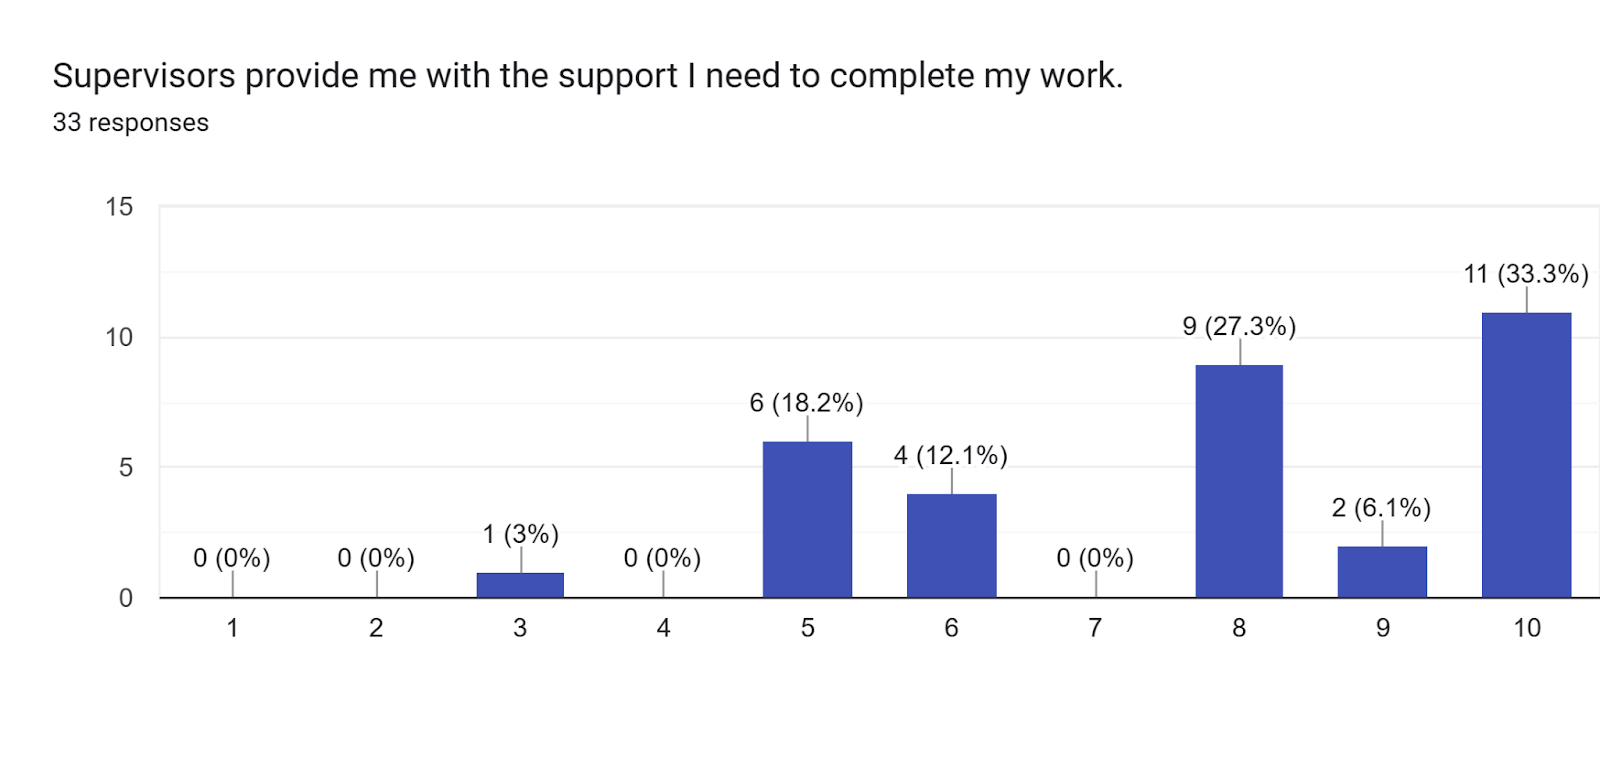 Forms response chart. Question title: Supervisors provide me with the support I need to complete my work.. Number of responses: 33 responses.